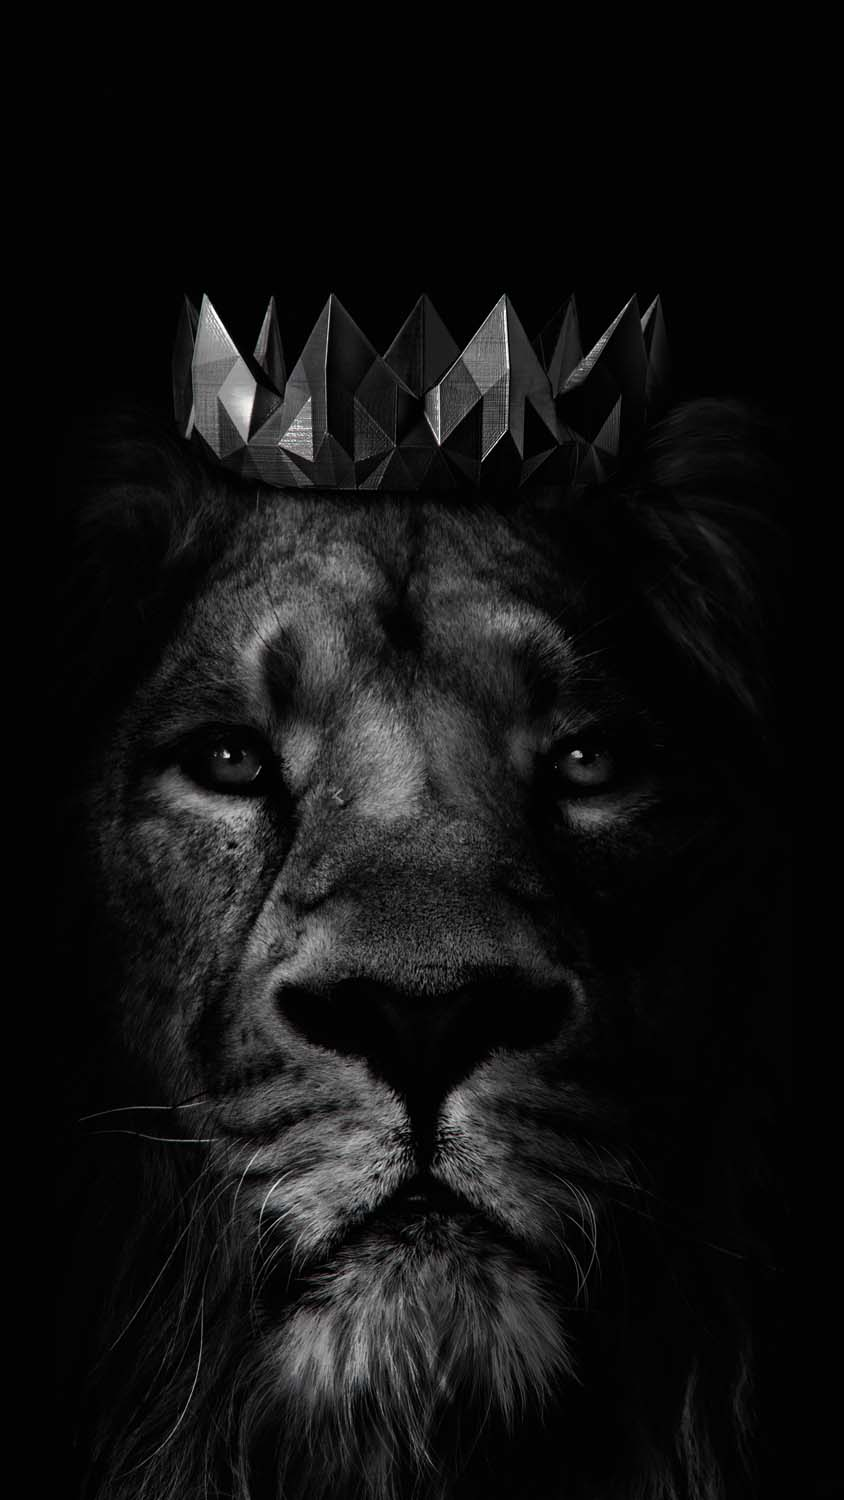 King Lion IPhone Wallpaper HD  IPhone Wallpapers